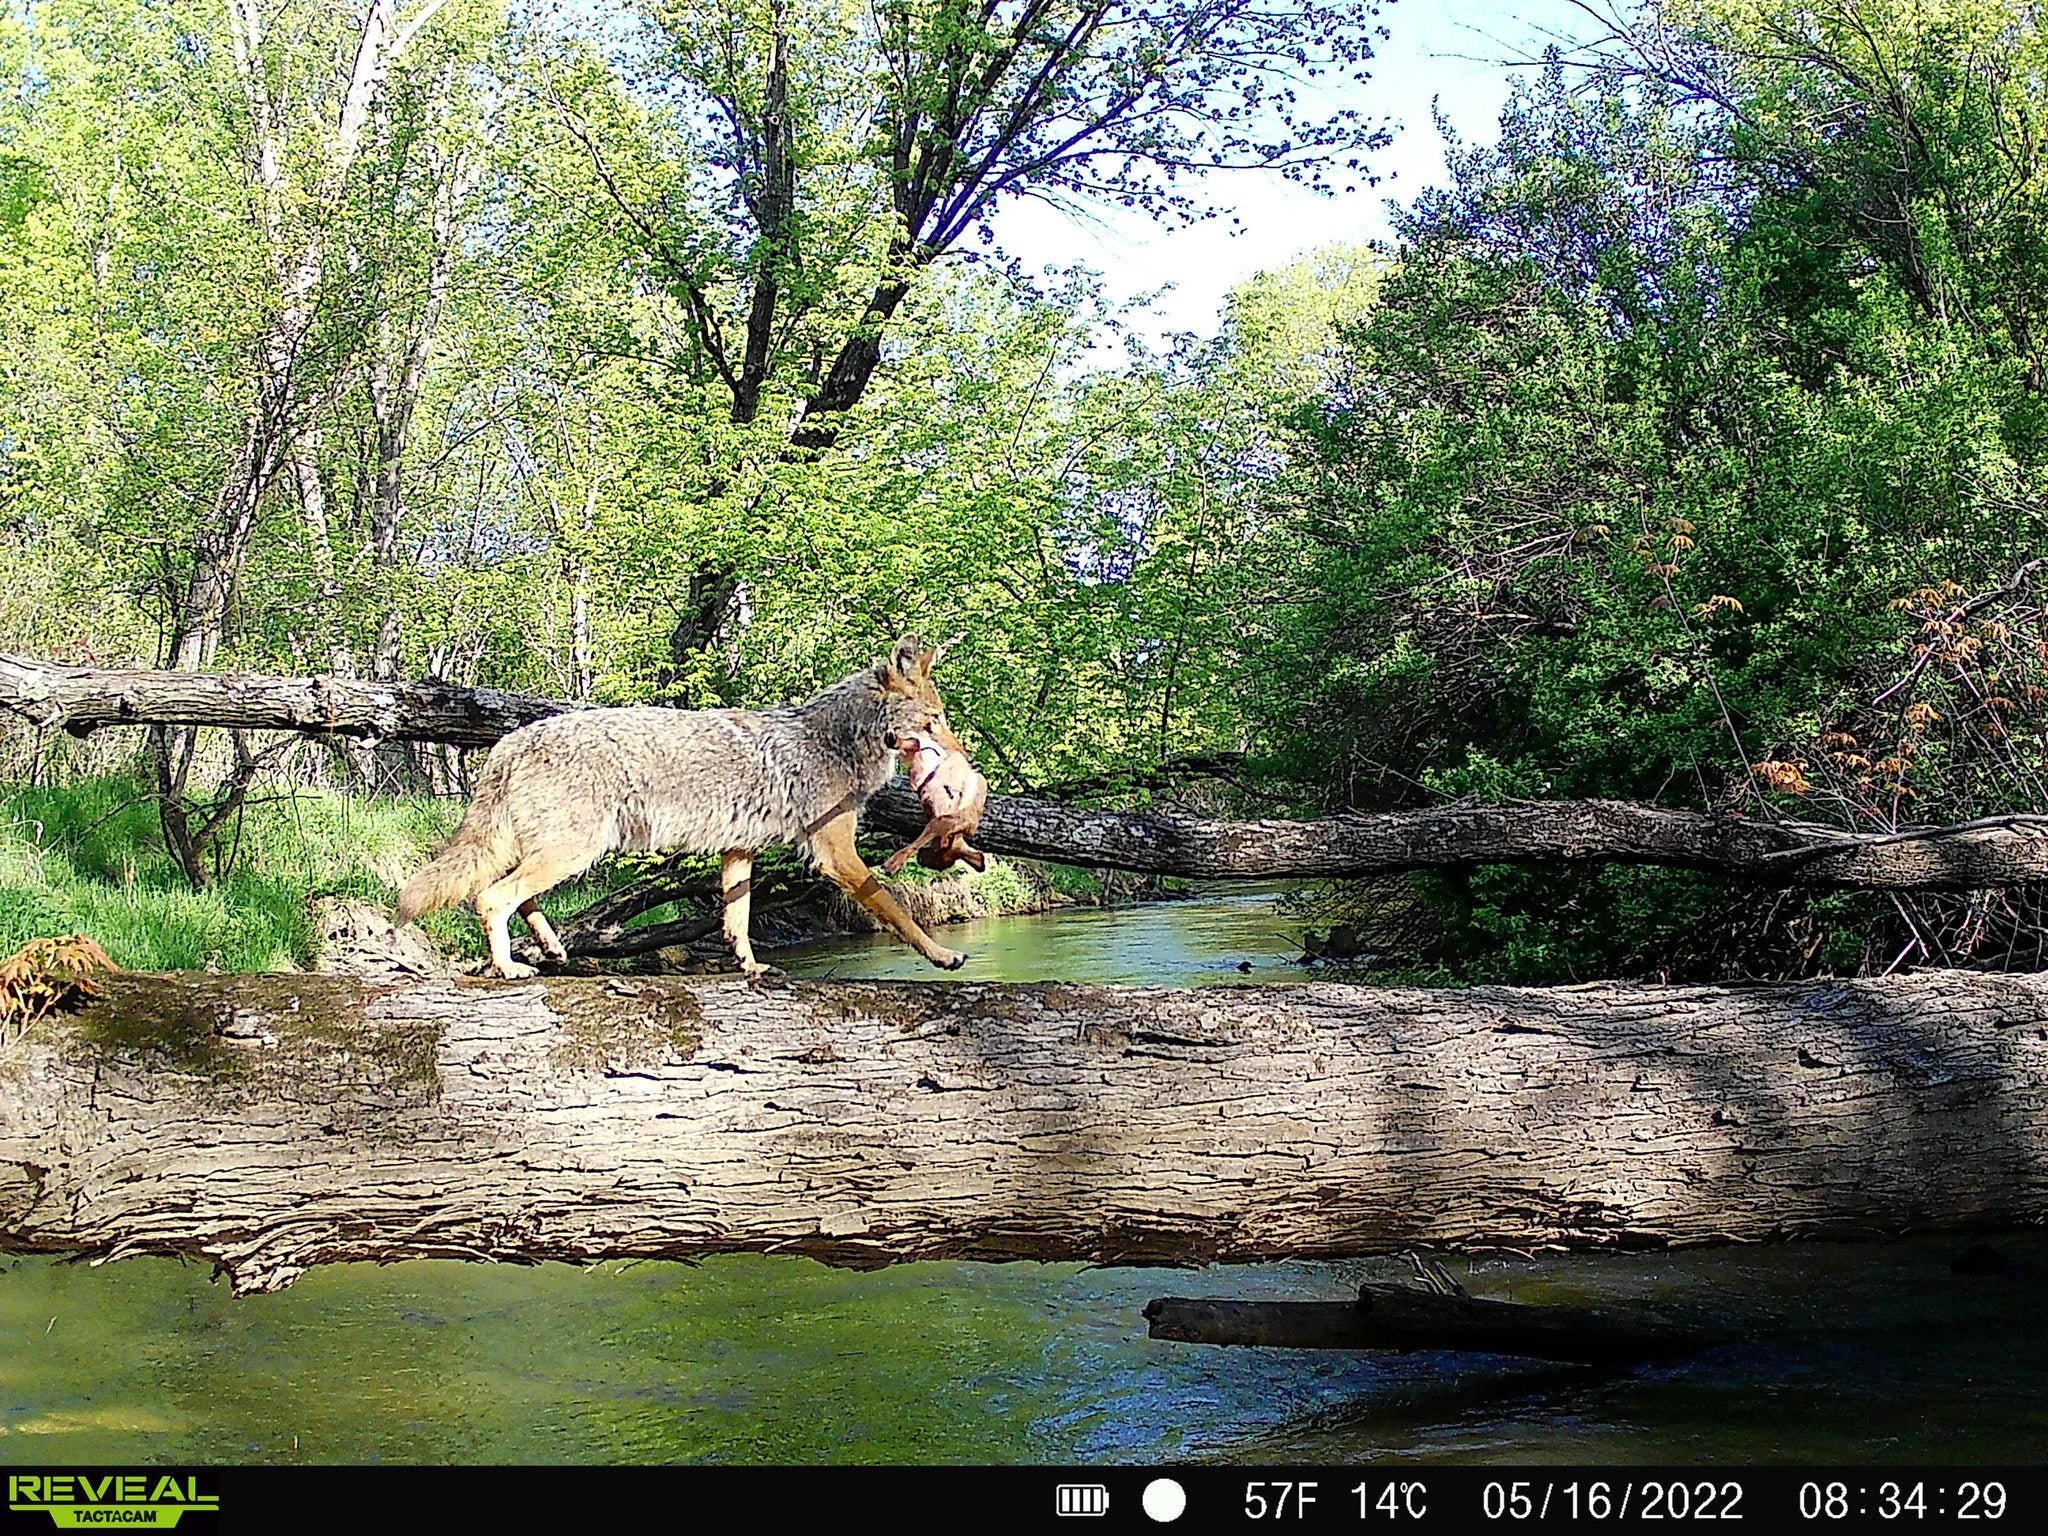 wildest trail camera photo, coyote crossing